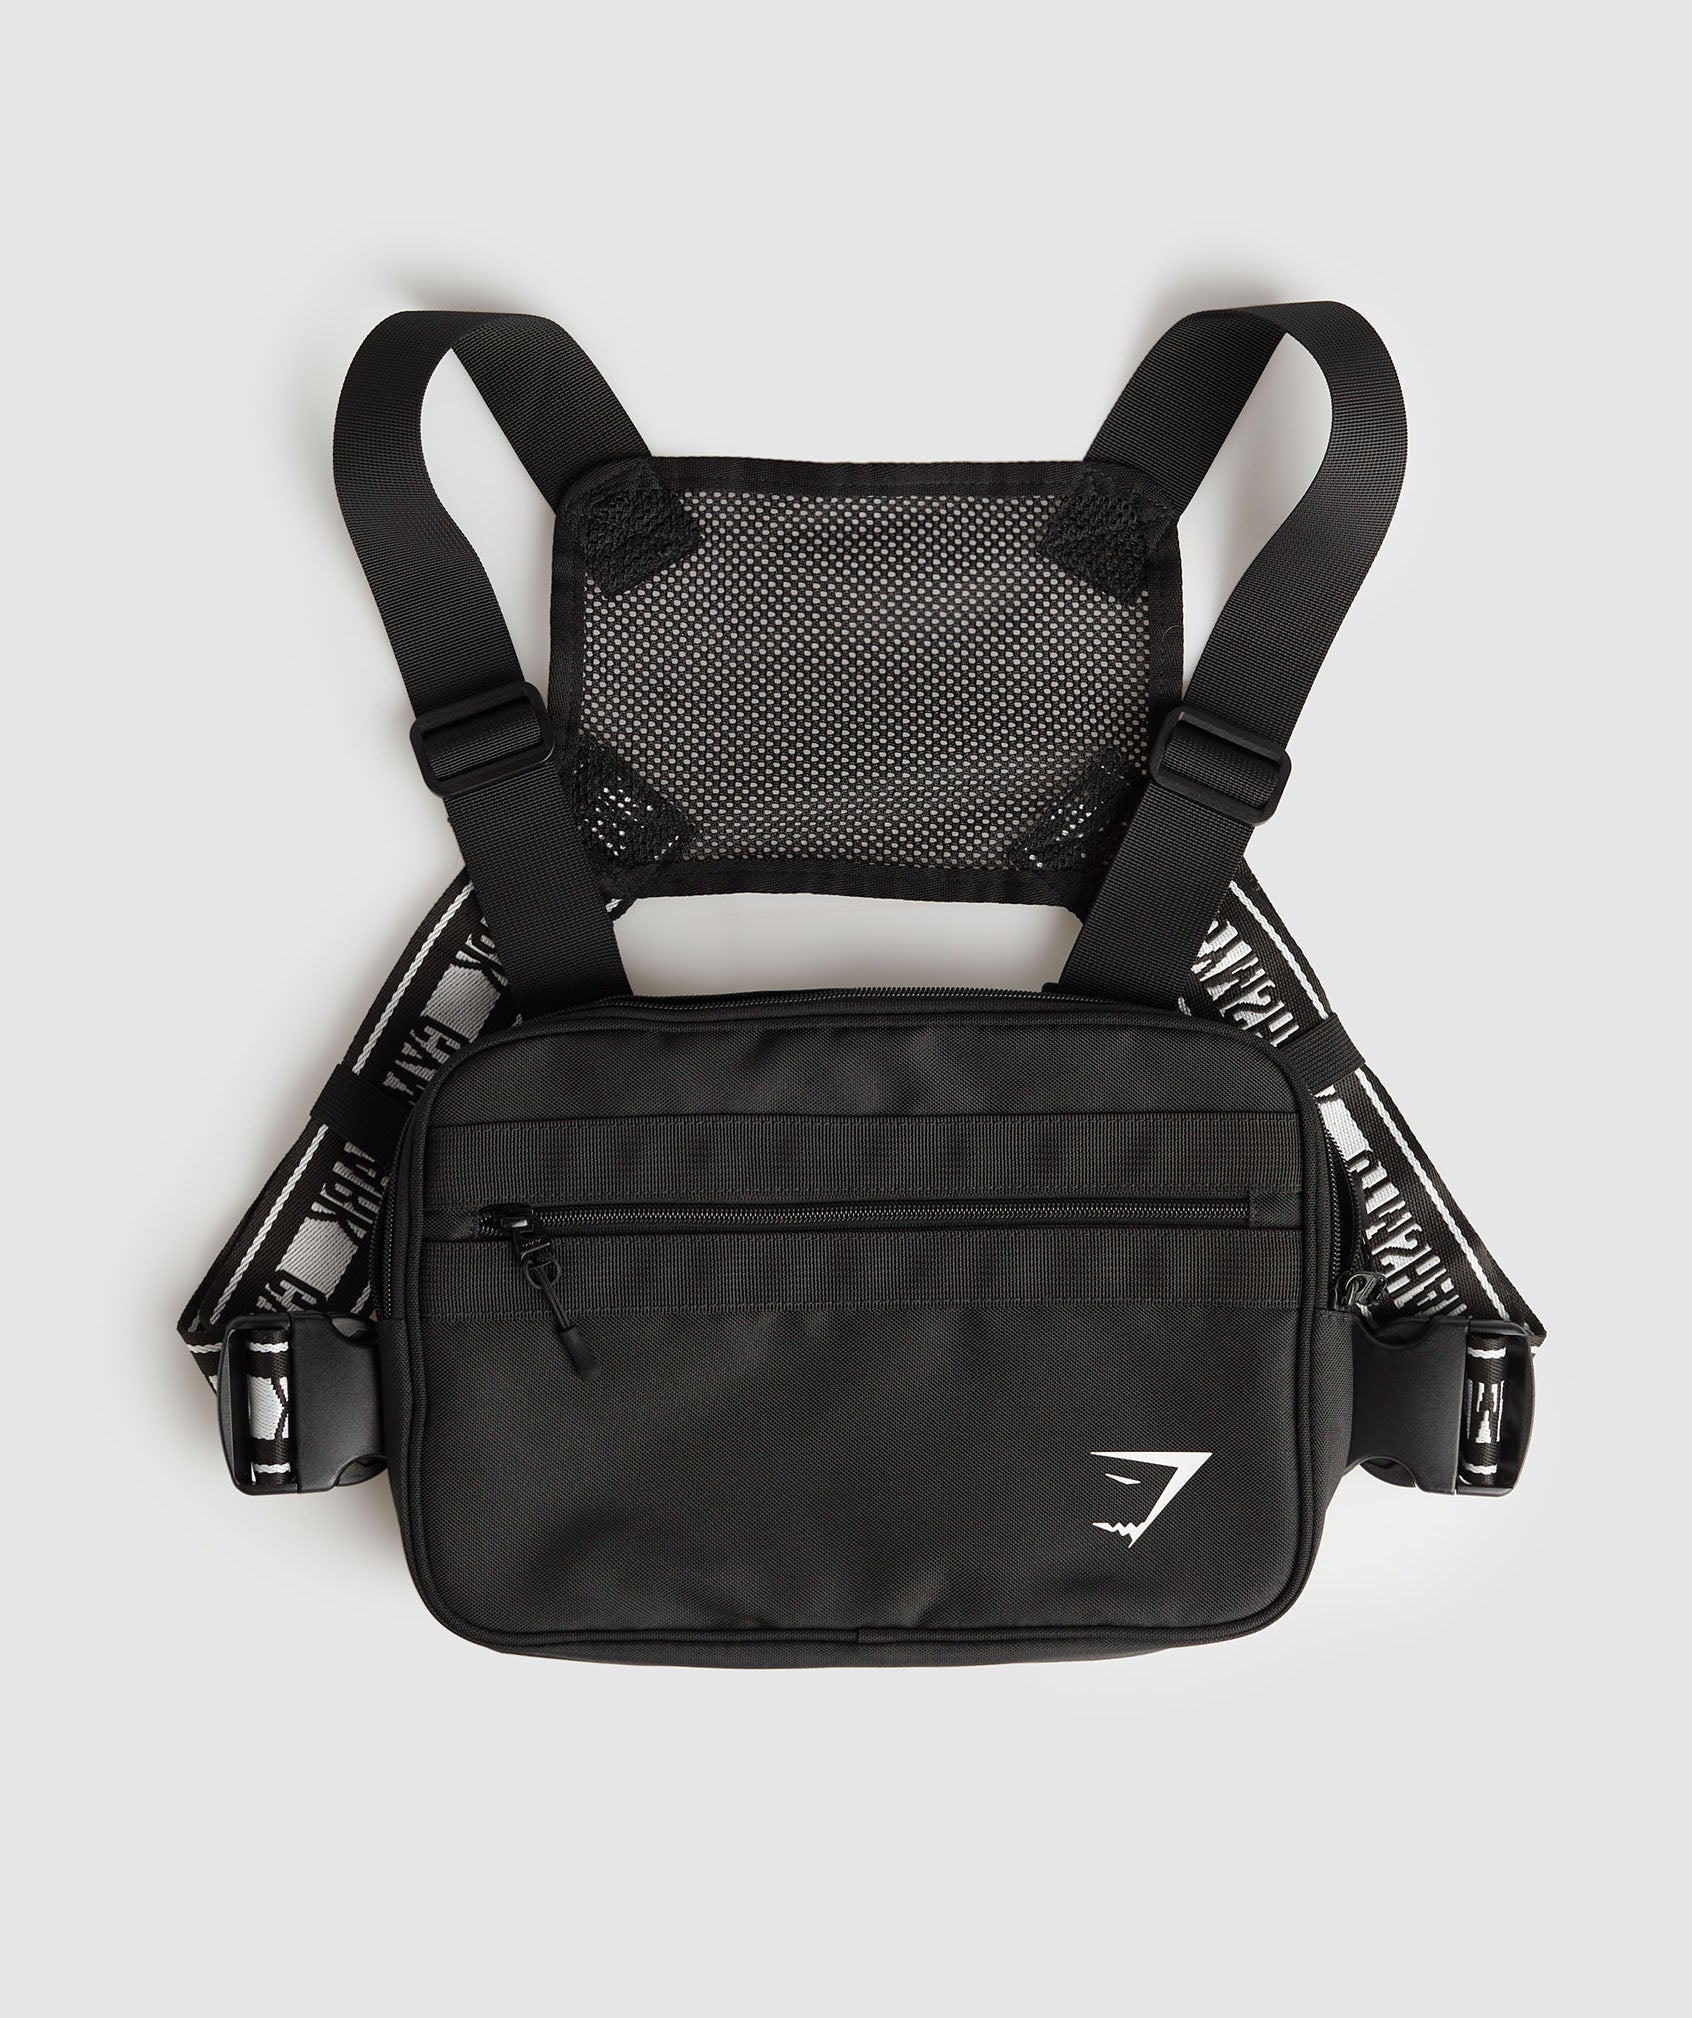 Chest Rig in Black - view 2